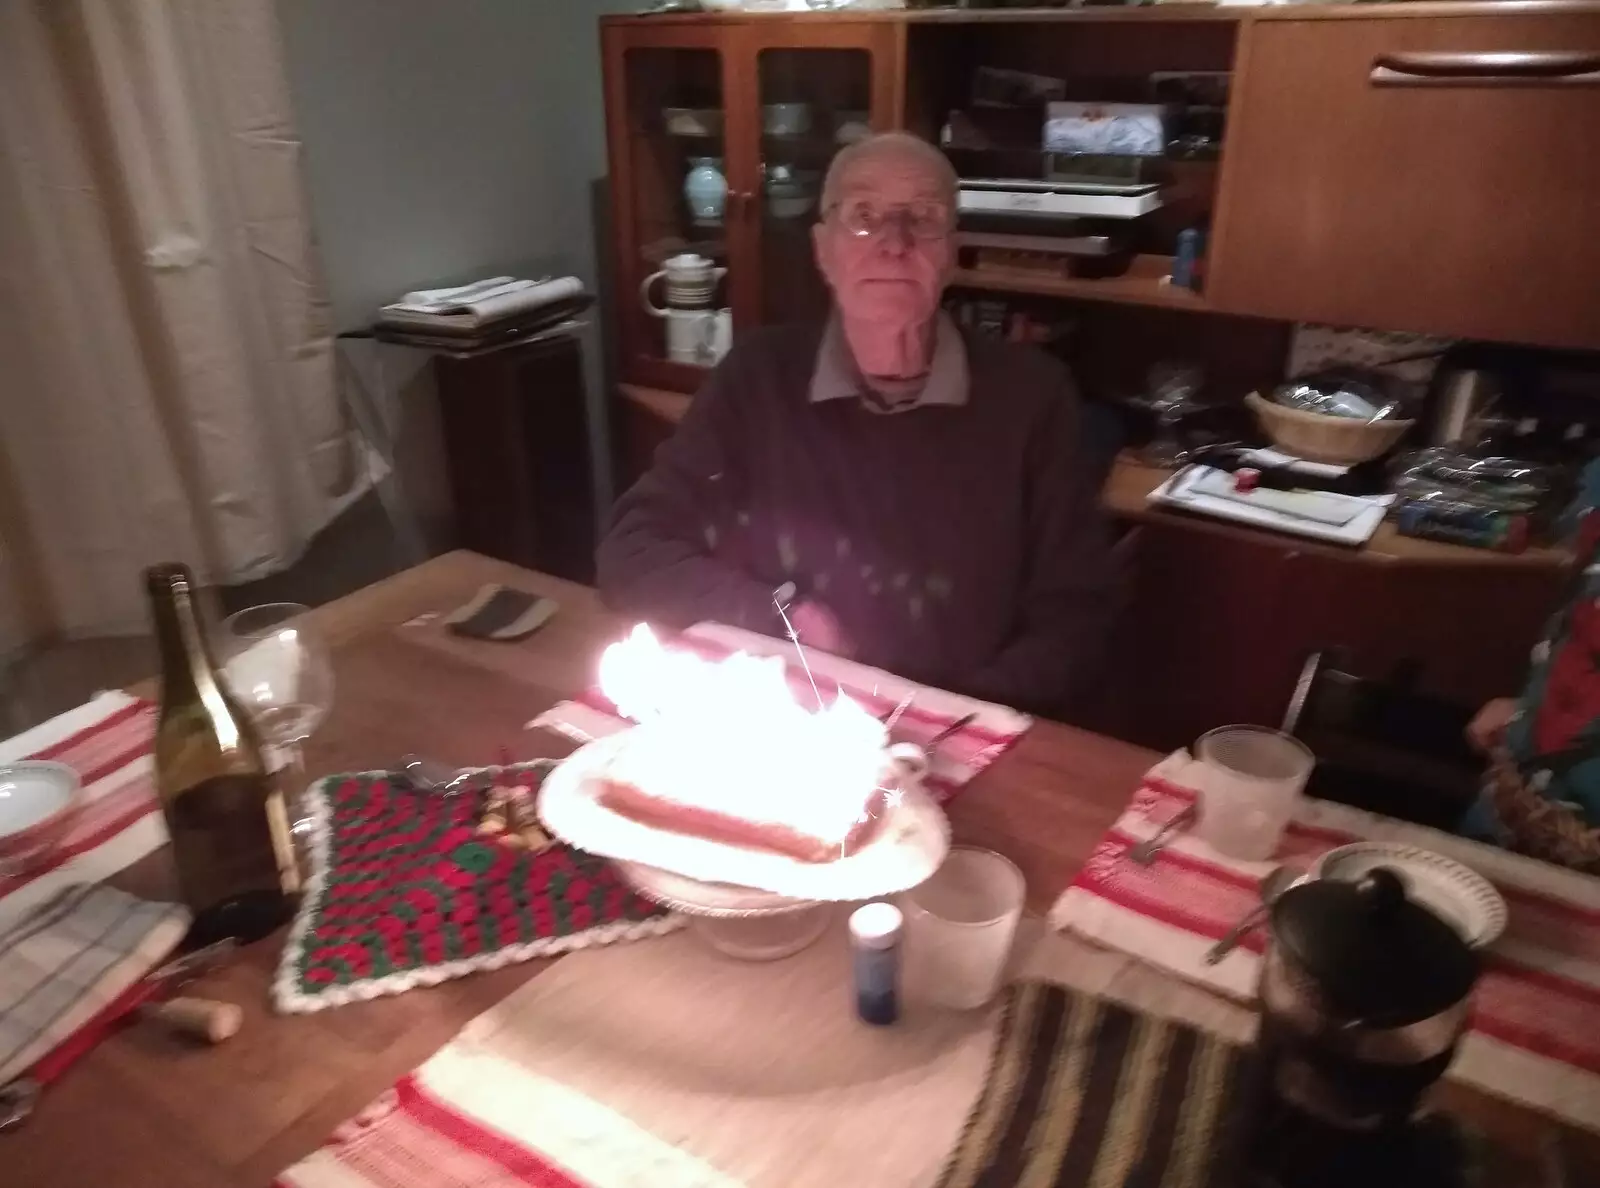 Grandad's cake, from A Walk Around Eye, and the Return of Red Tent, Suffolk and London - 25th February 2018